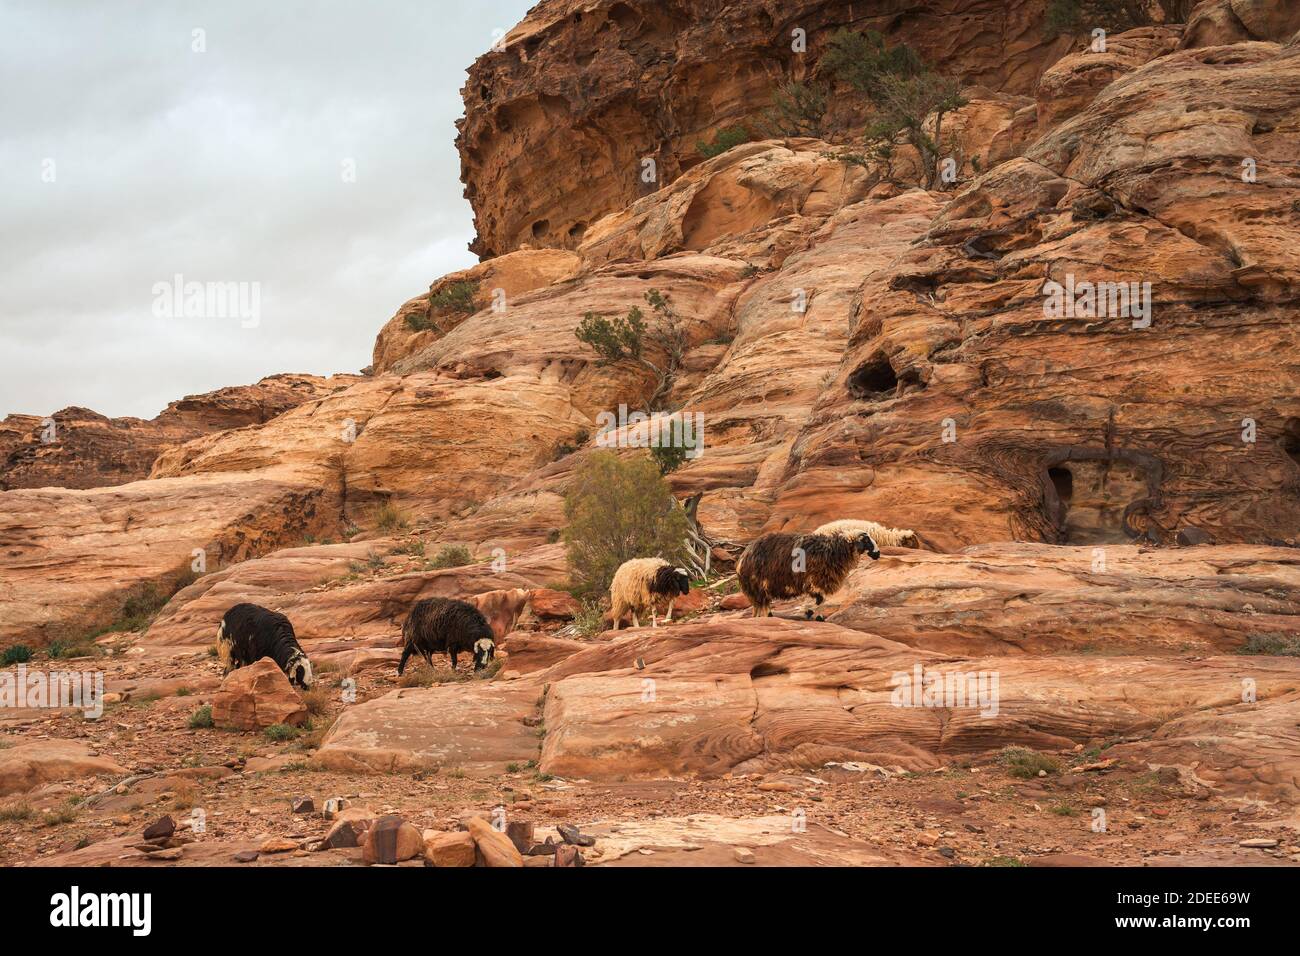 The life of the sheeps in the mountains of Jordan on a cloudy day Stock Photo